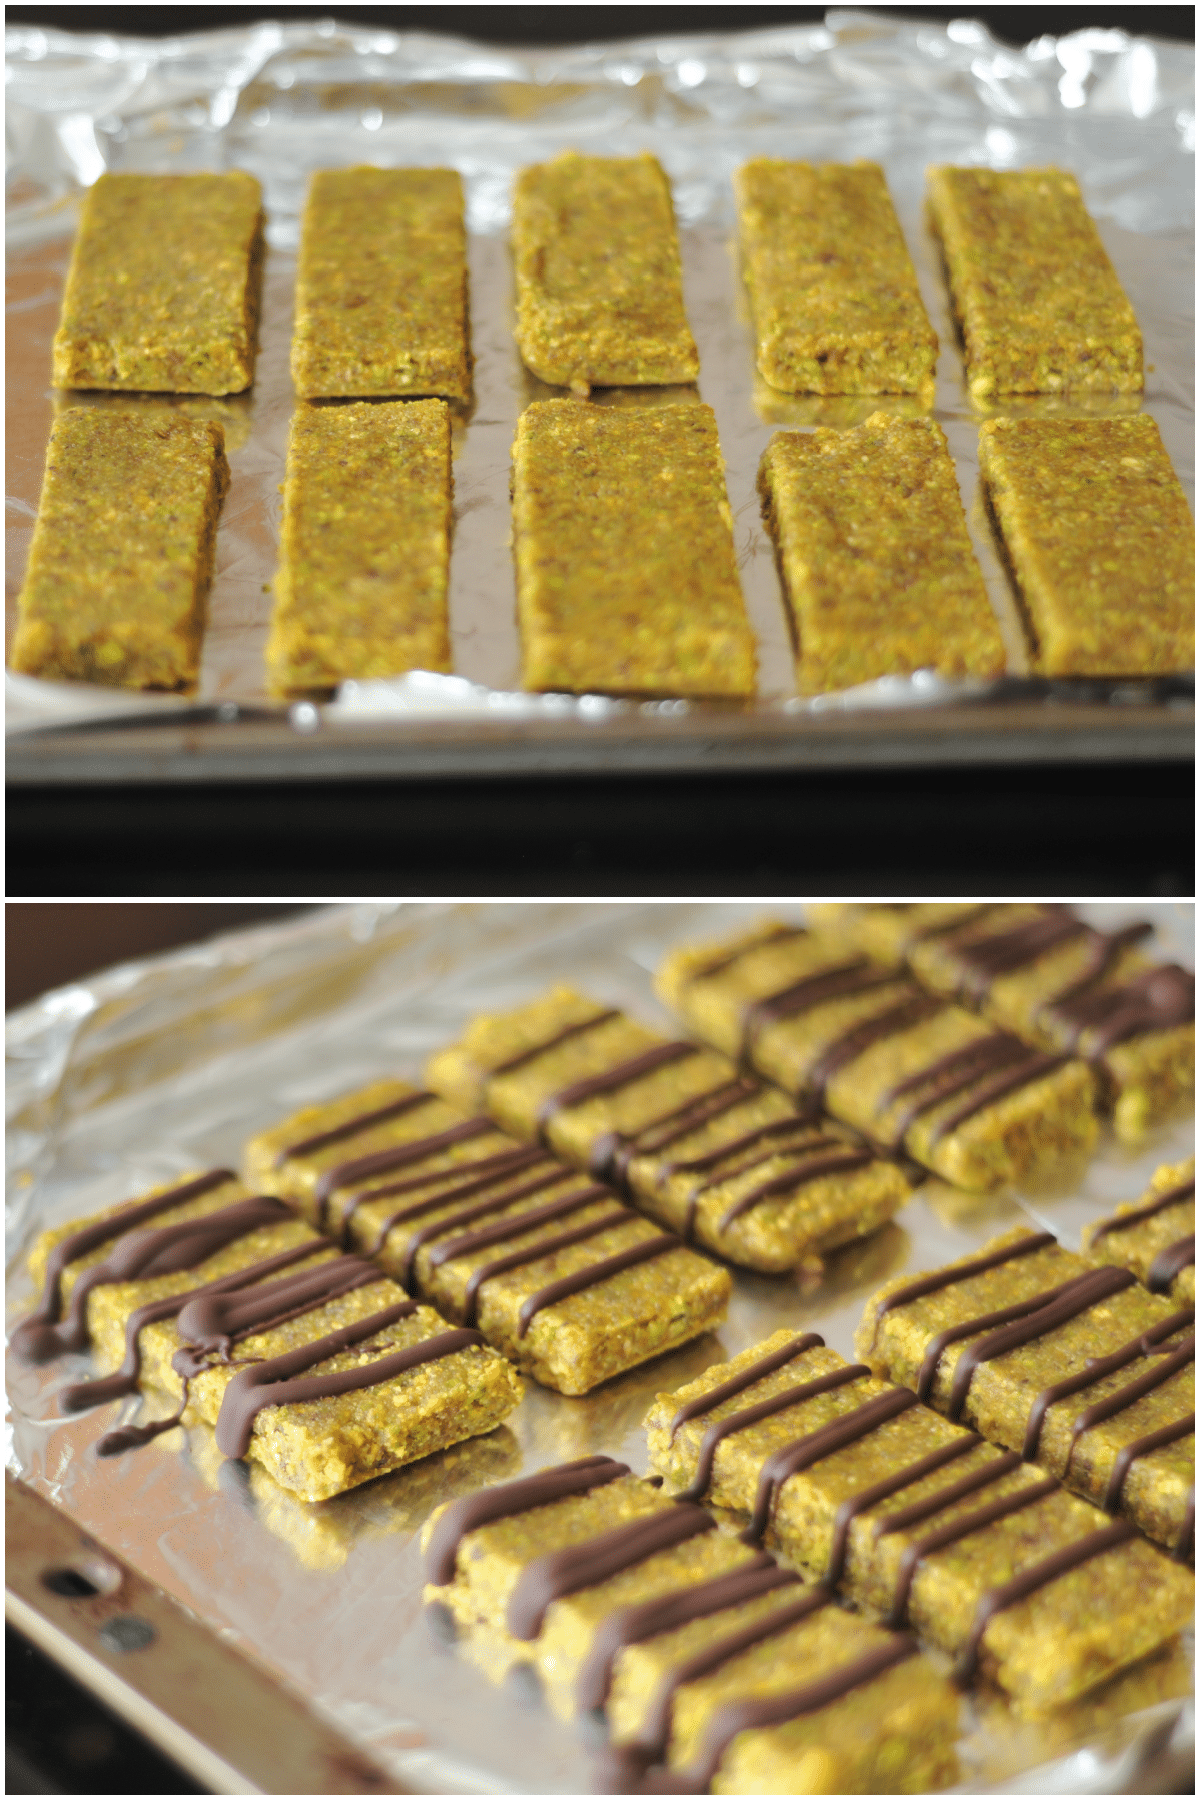 A two image collage shows how to make pistachio lime bars: slice the plain bars and arrange them on a lined baking sheet. Melt chocolate and drizzle over the top of bars. Set aside to dry.